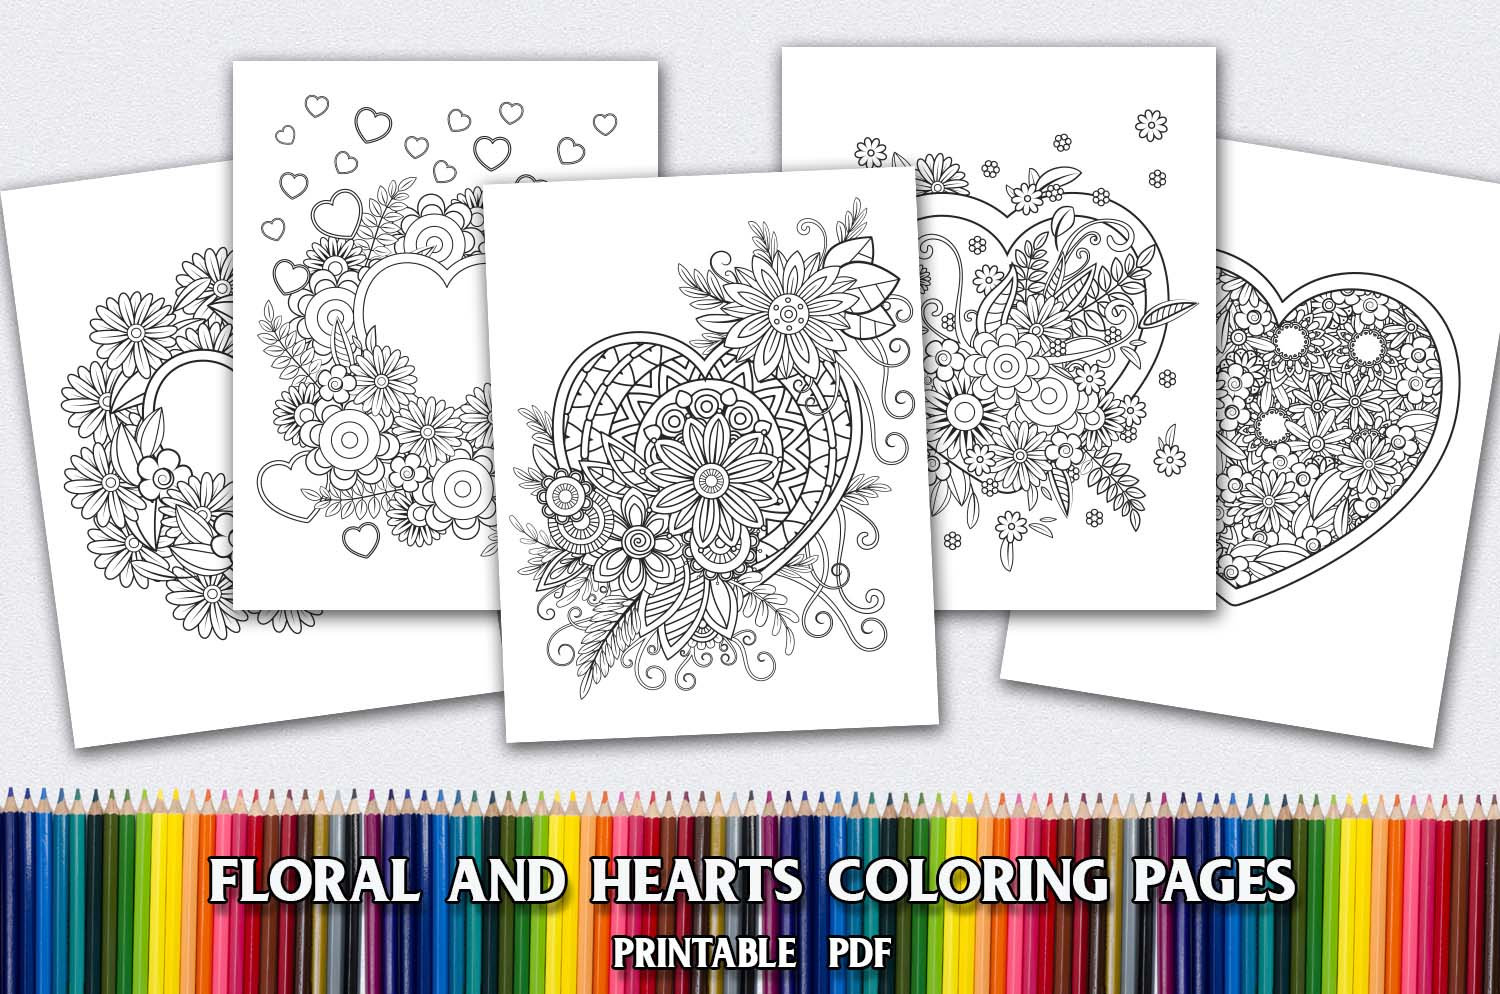 Heart Coloring Pages Pdf 5 Heart Mandala Coloring Pages For Adults 5 Printable Coloring Pages Instant Download Pdf Grown Up Coloring Pages Floral Coloring Pages